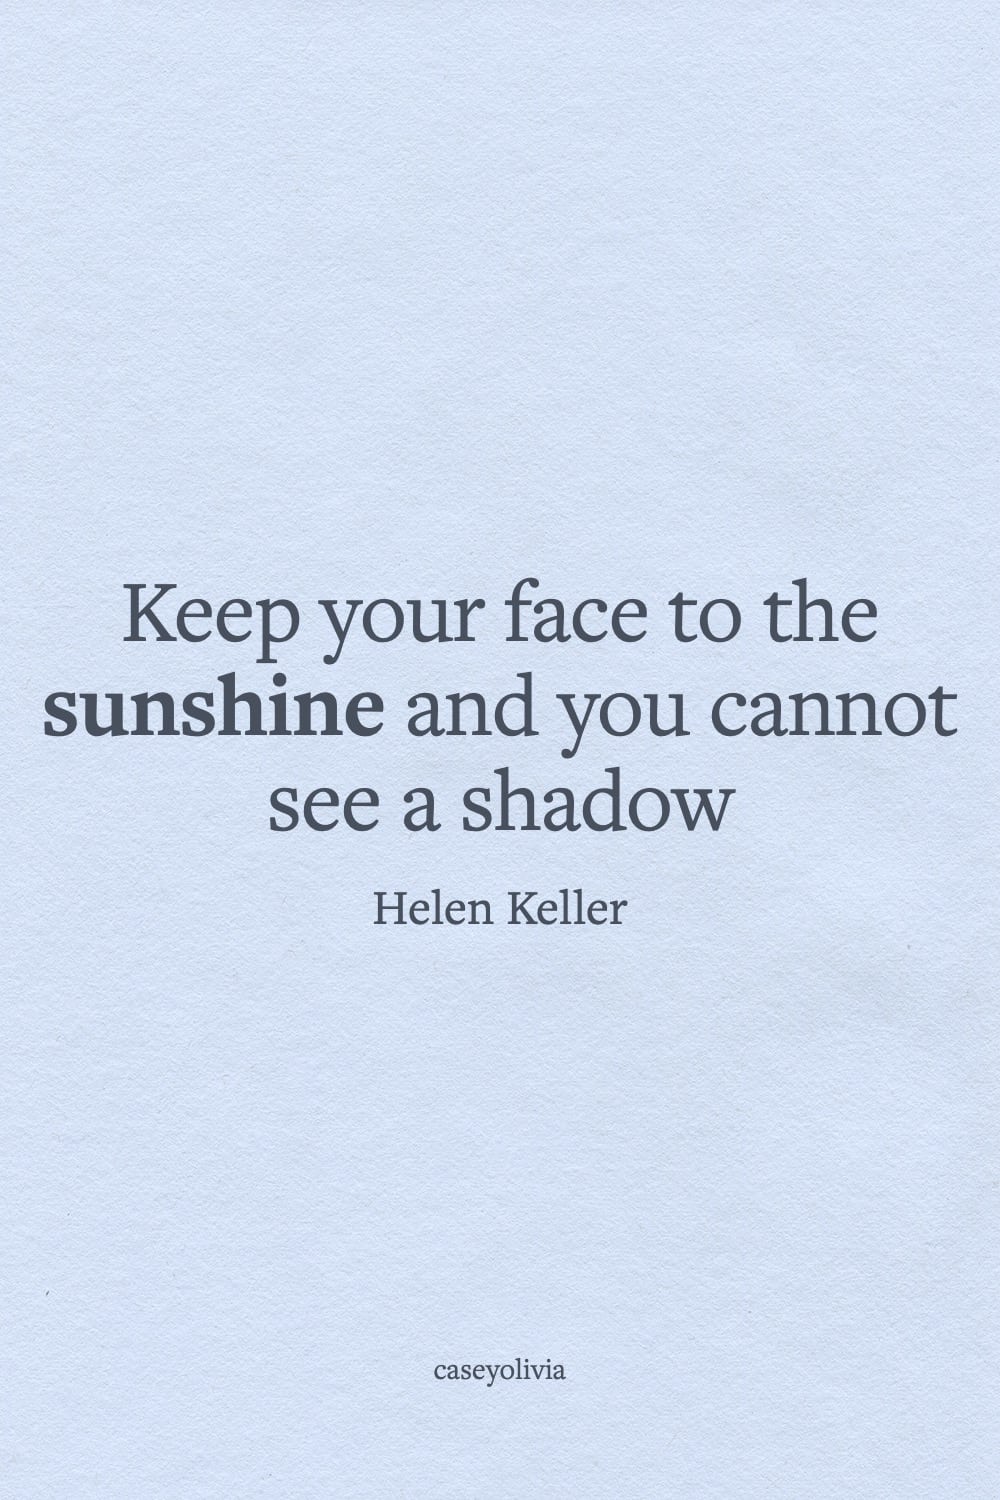 keep your face to the sunshine short quote from helen keller